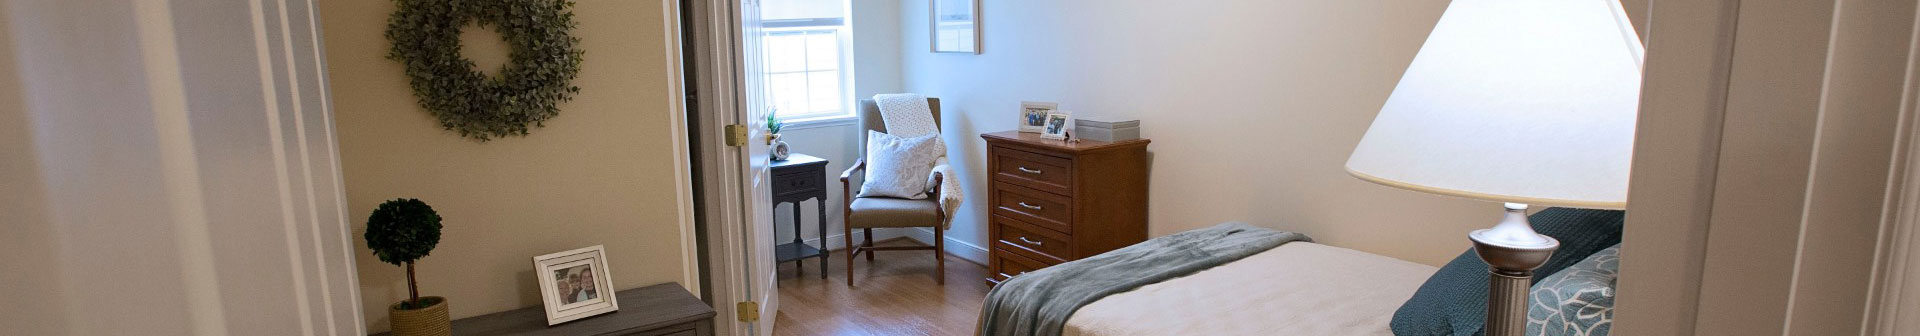 cropped image of a memory care suite at Artis Senior Living